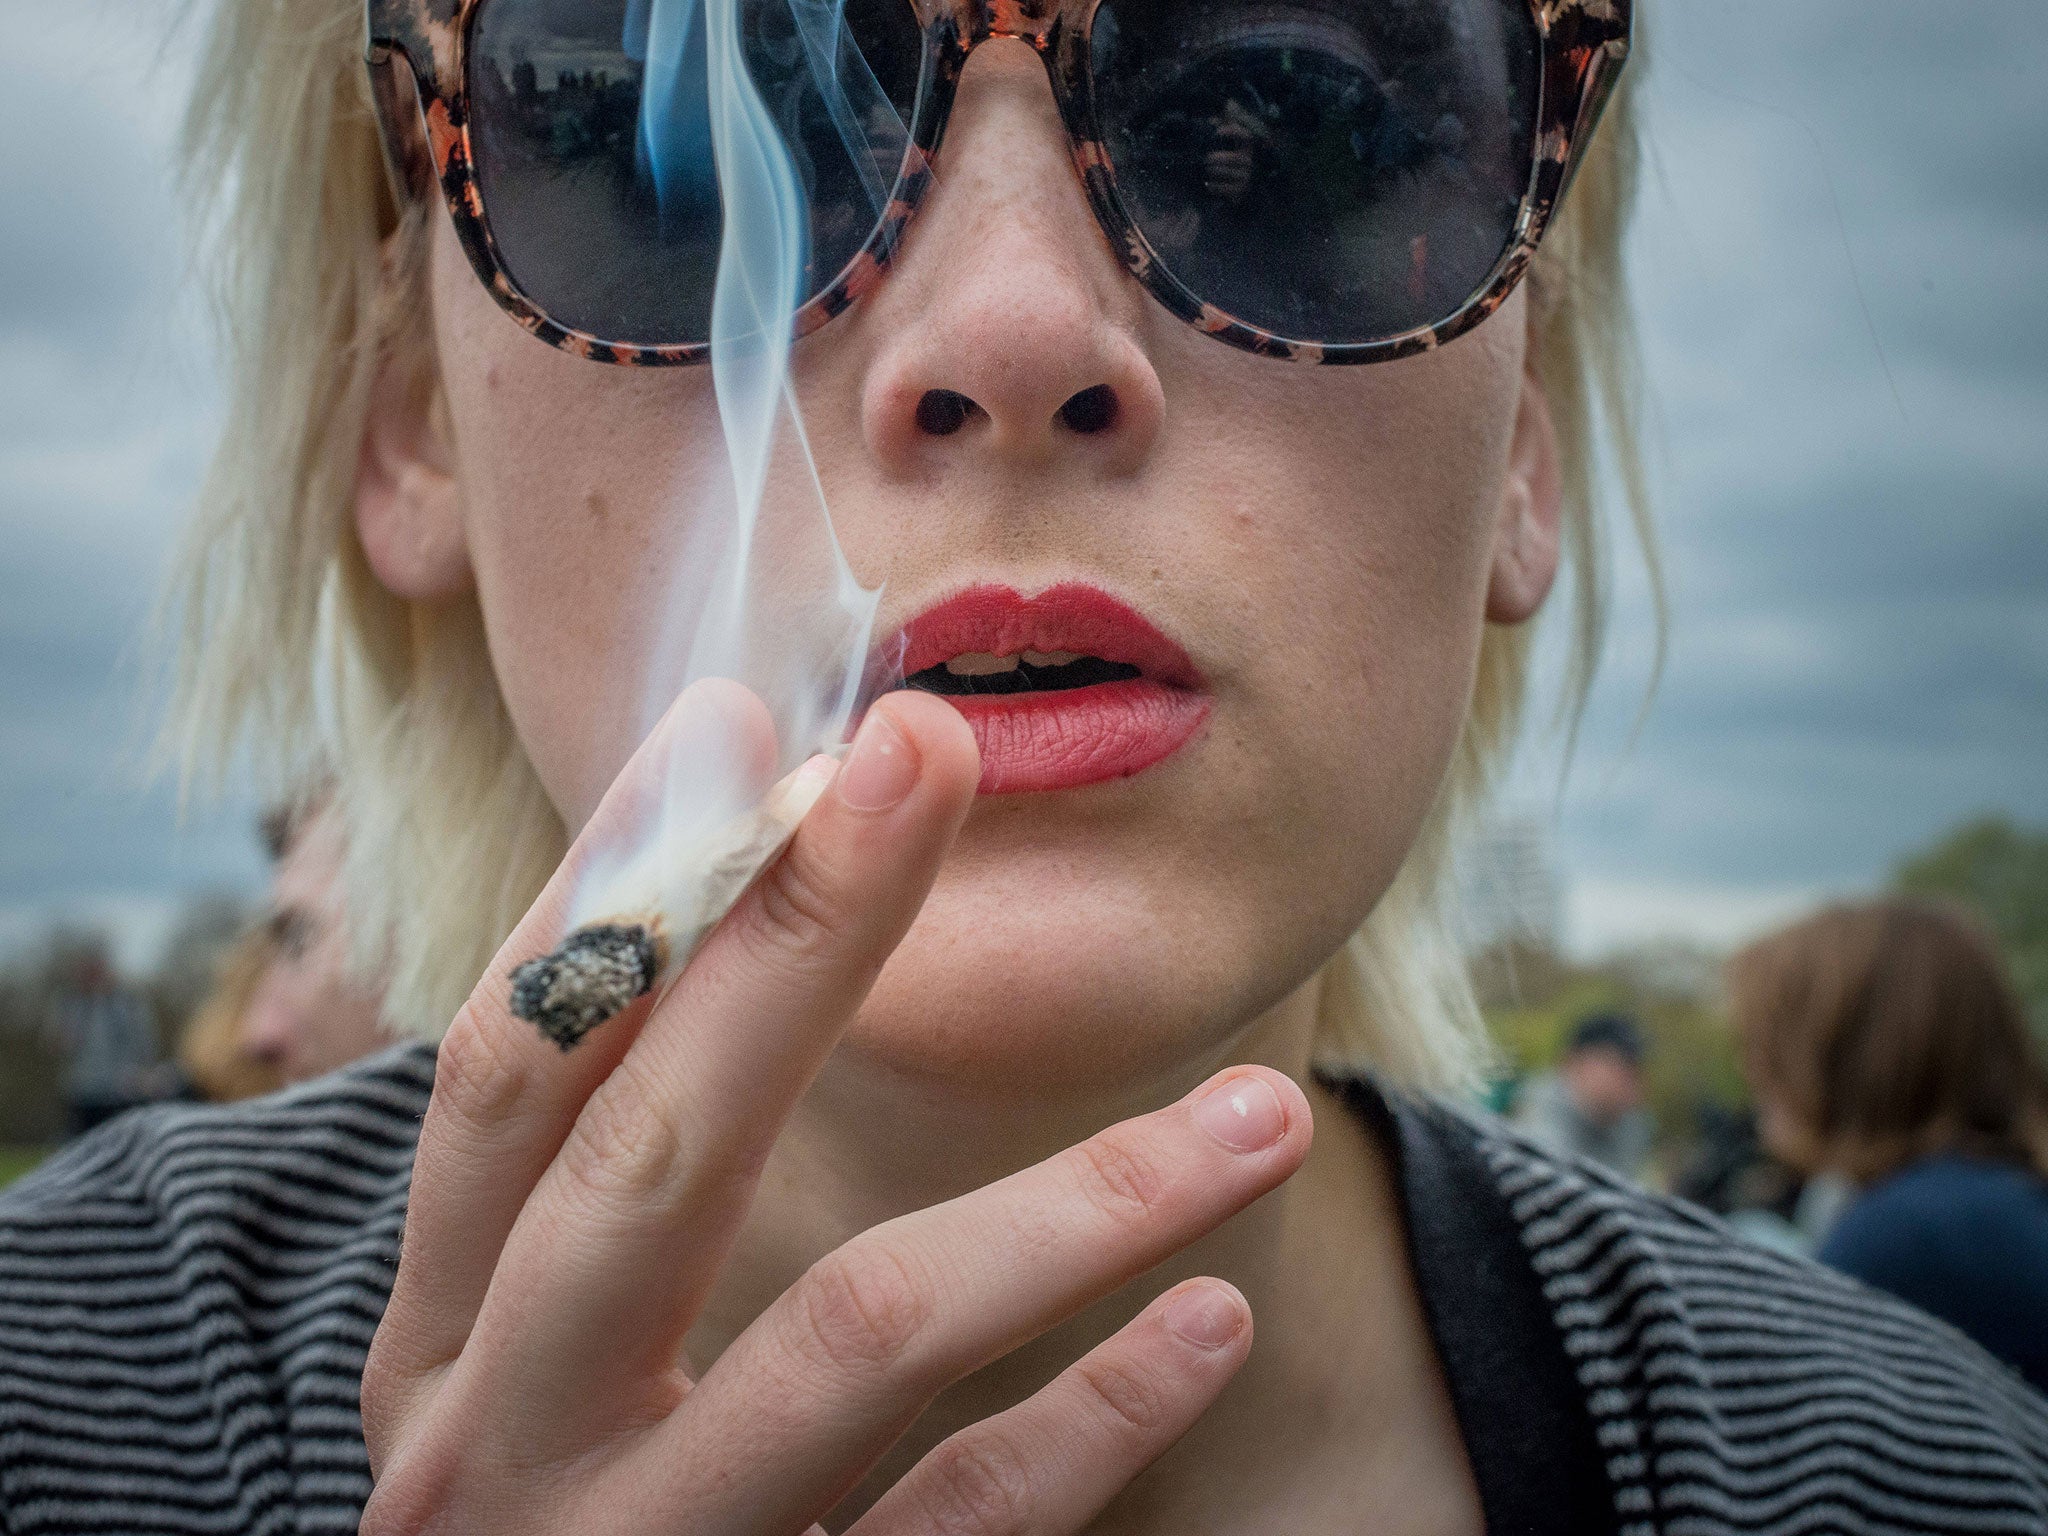 Being high on cannabis makes people ‘significantly’ less likely to tap a computer keyboard for money